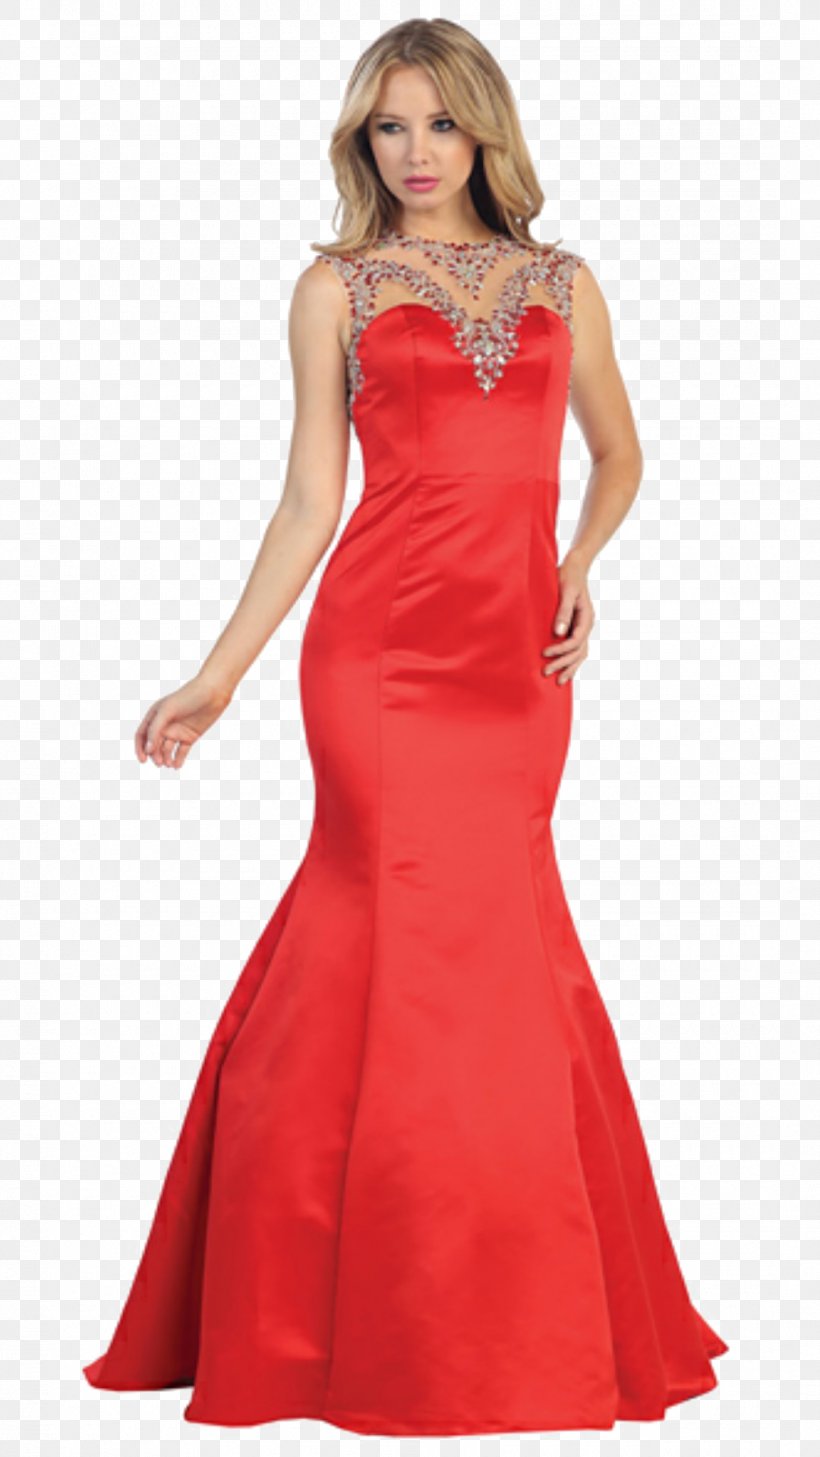 Cocktail Dress Prom Evening Gown Wedding Dress, PNG, 1080x1920px, Dress, Ball, Ball Gown, Bridal Clothing, Bridal Party Dress Download Free